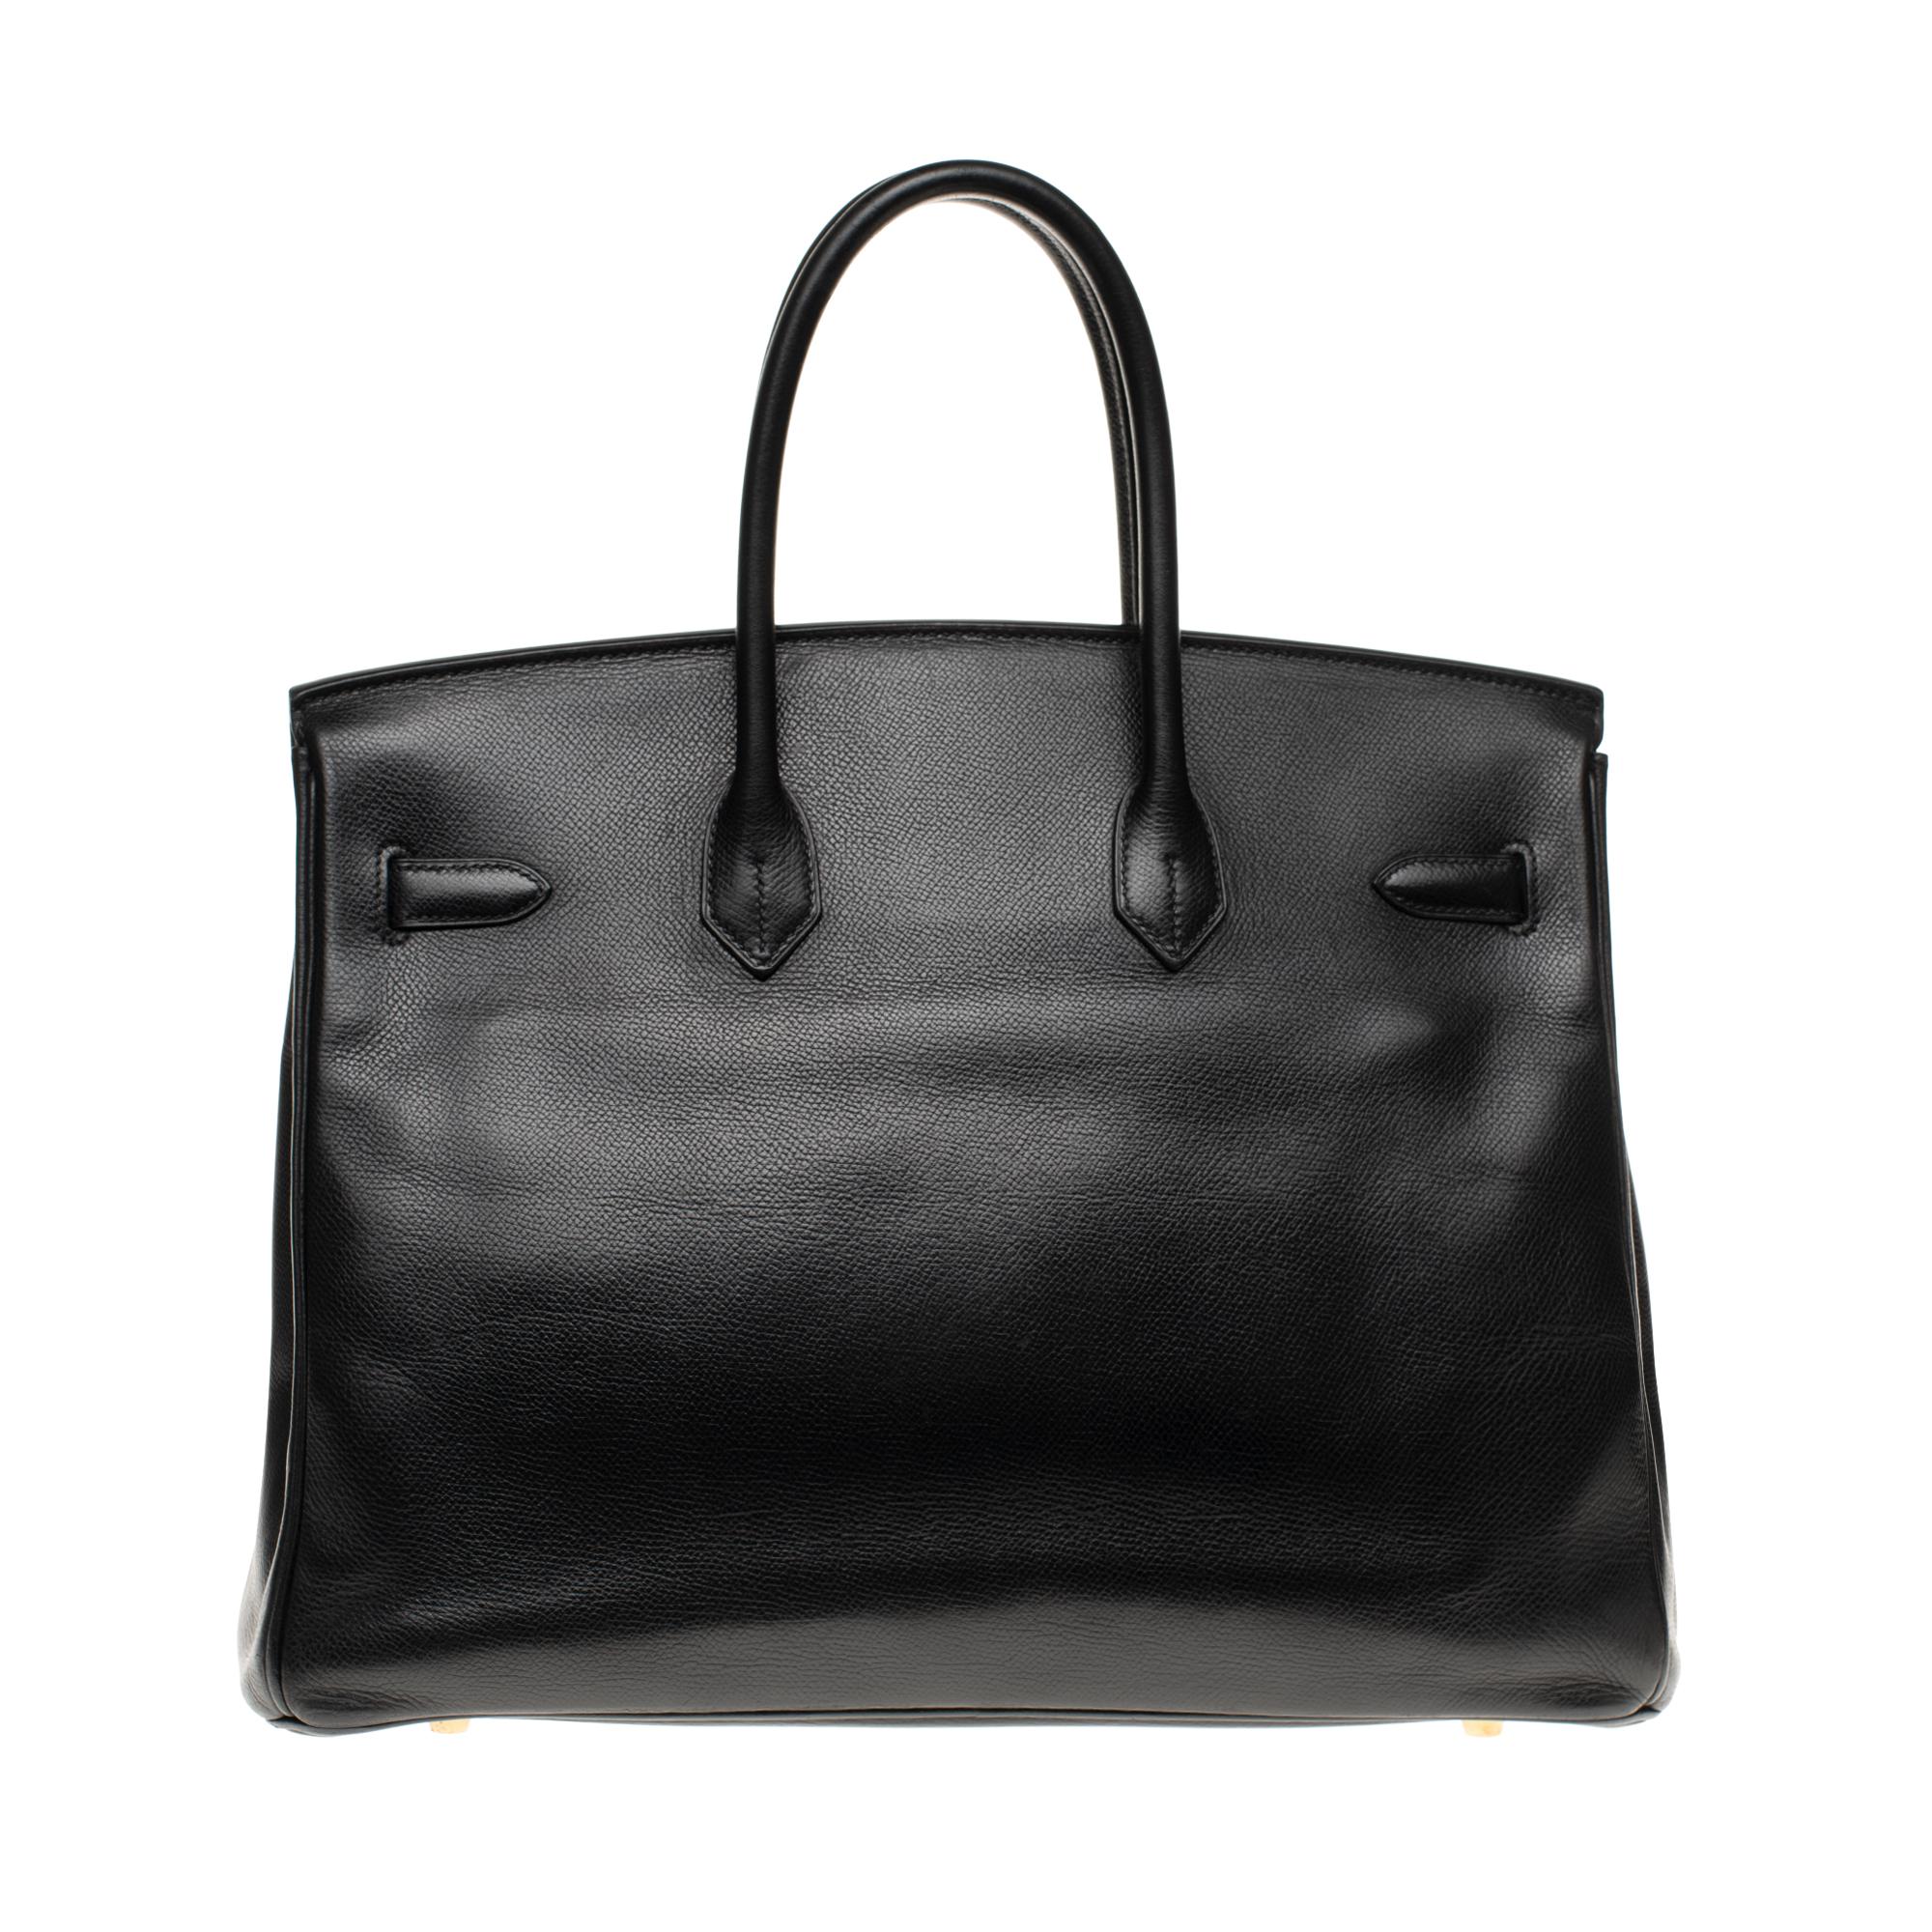 Stunning Hermes Birkin 35 cm handbag in black Courchevel leather, gold metal trim, double gold leather handle for hand-hold.

Shut down by flap.
black leather inner lining, zipped pocket, patch pocket.
Signature: 